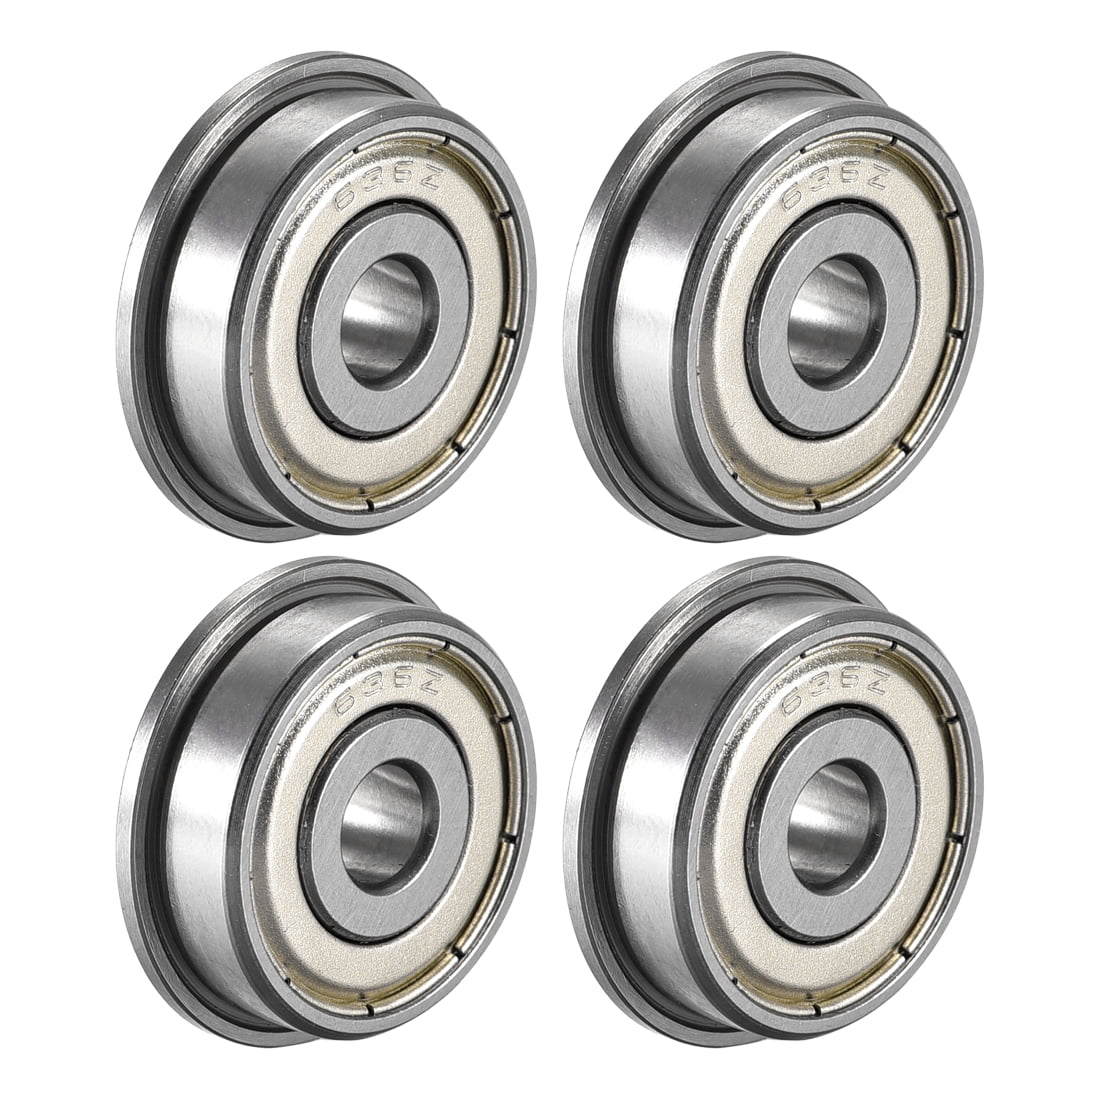 sourcing map F636ZZ Flanged Ball Bearing 6x22x7mm Double Metal Shielded Chrome Steel Bearings 4pcs GCr15